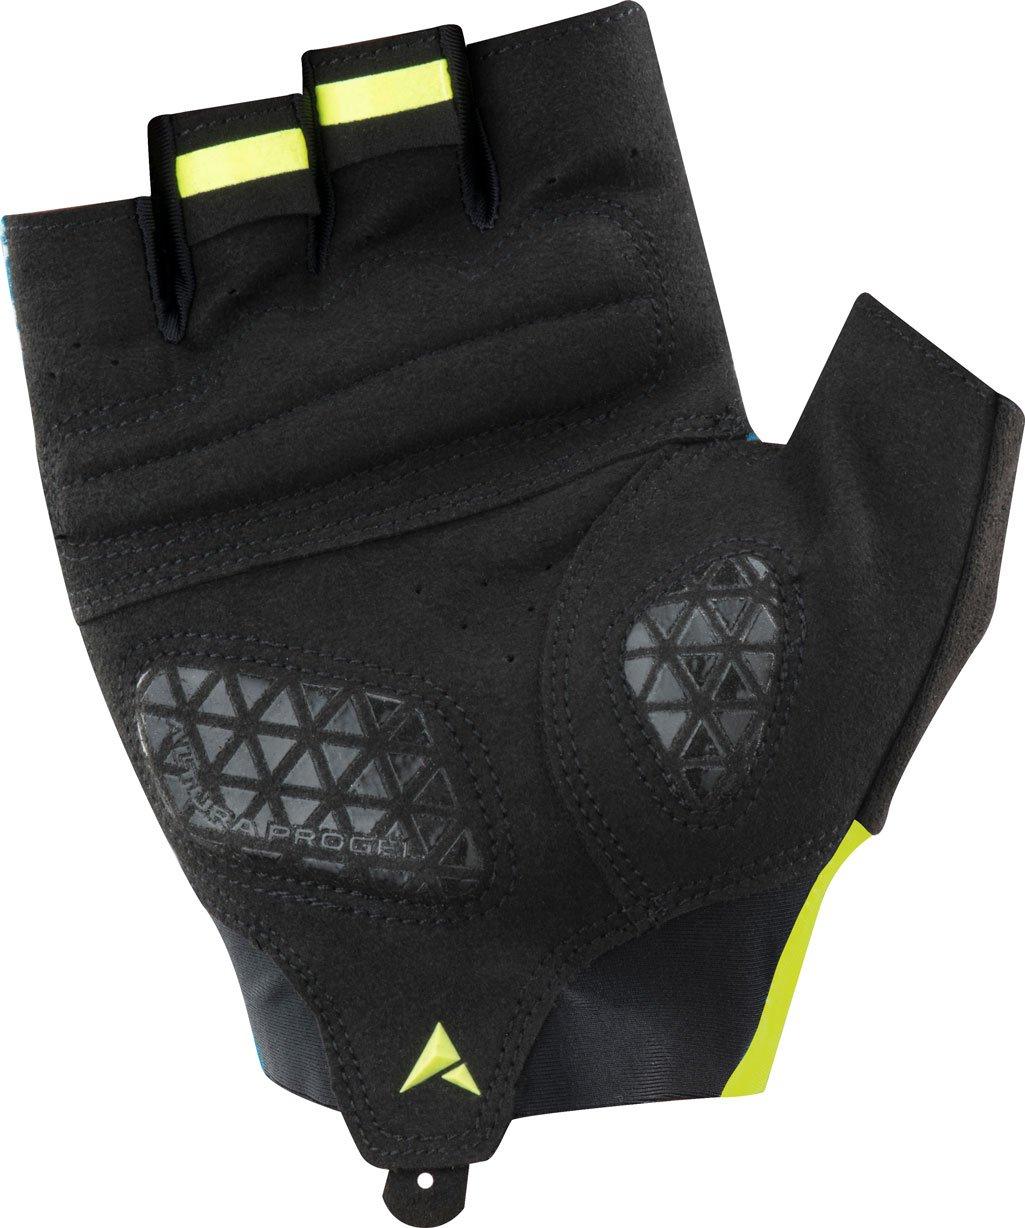 Altura ProGel Cycling Mitts Review